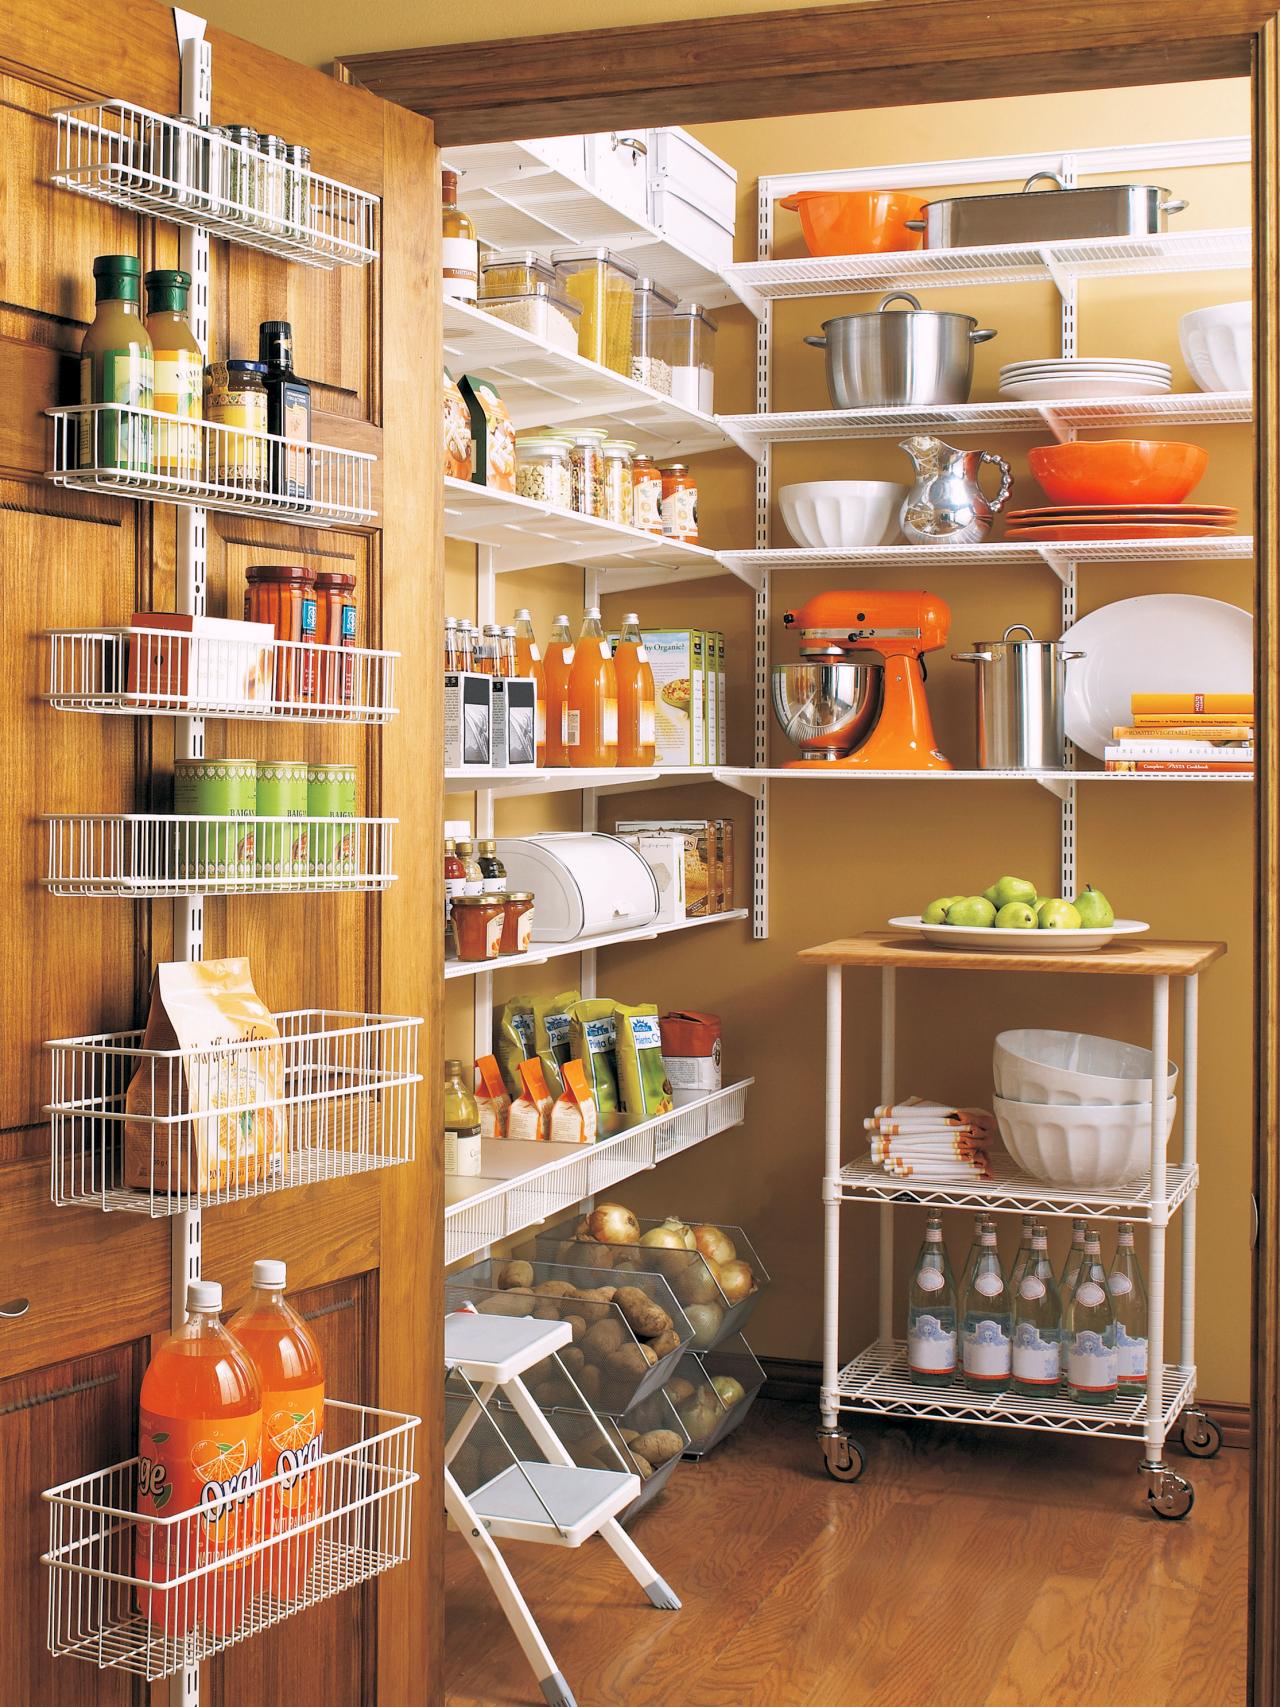 Pantries For An Organized Kitchen Diy, How To Build A Free Standing Kitchen Pantry Cabinet